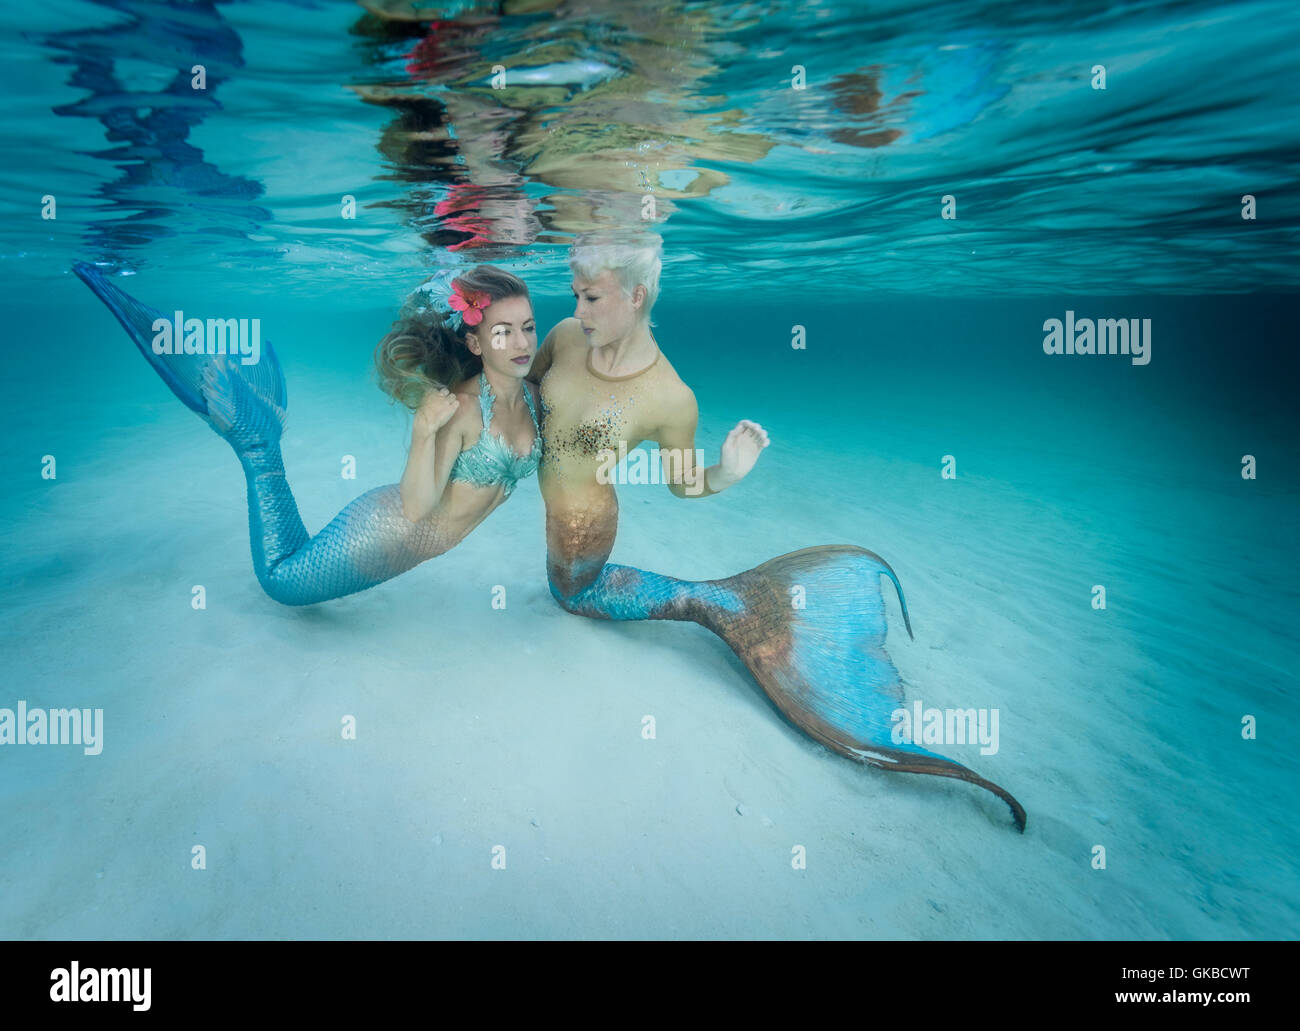 Two mermaids in the shallow waters of Exuma Cays in the Bahamas Islands Stock Photo